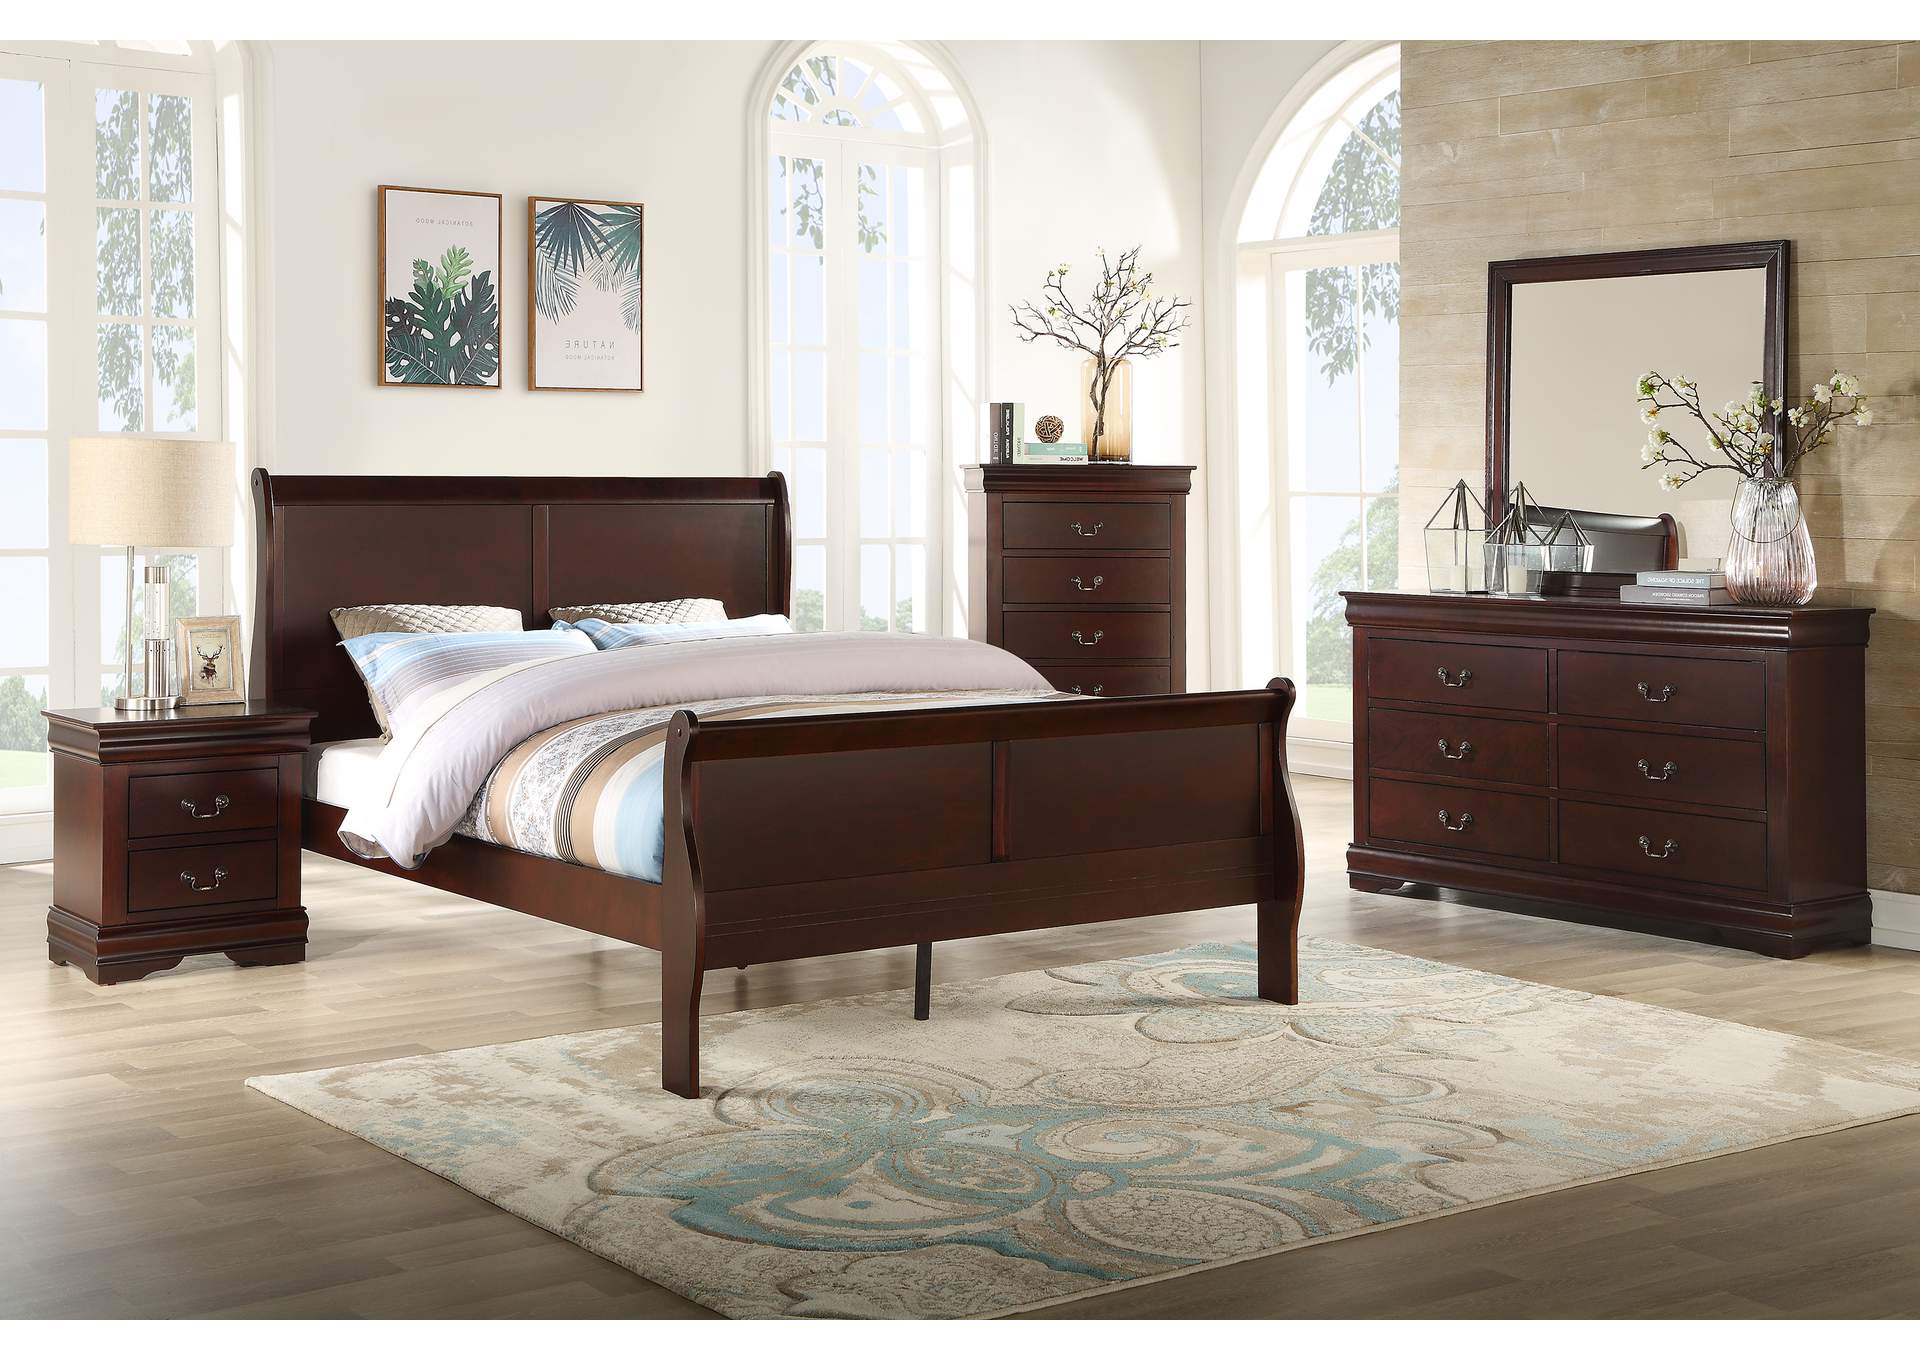 Louis Philip Cherry Twin Bed,Crown Mark